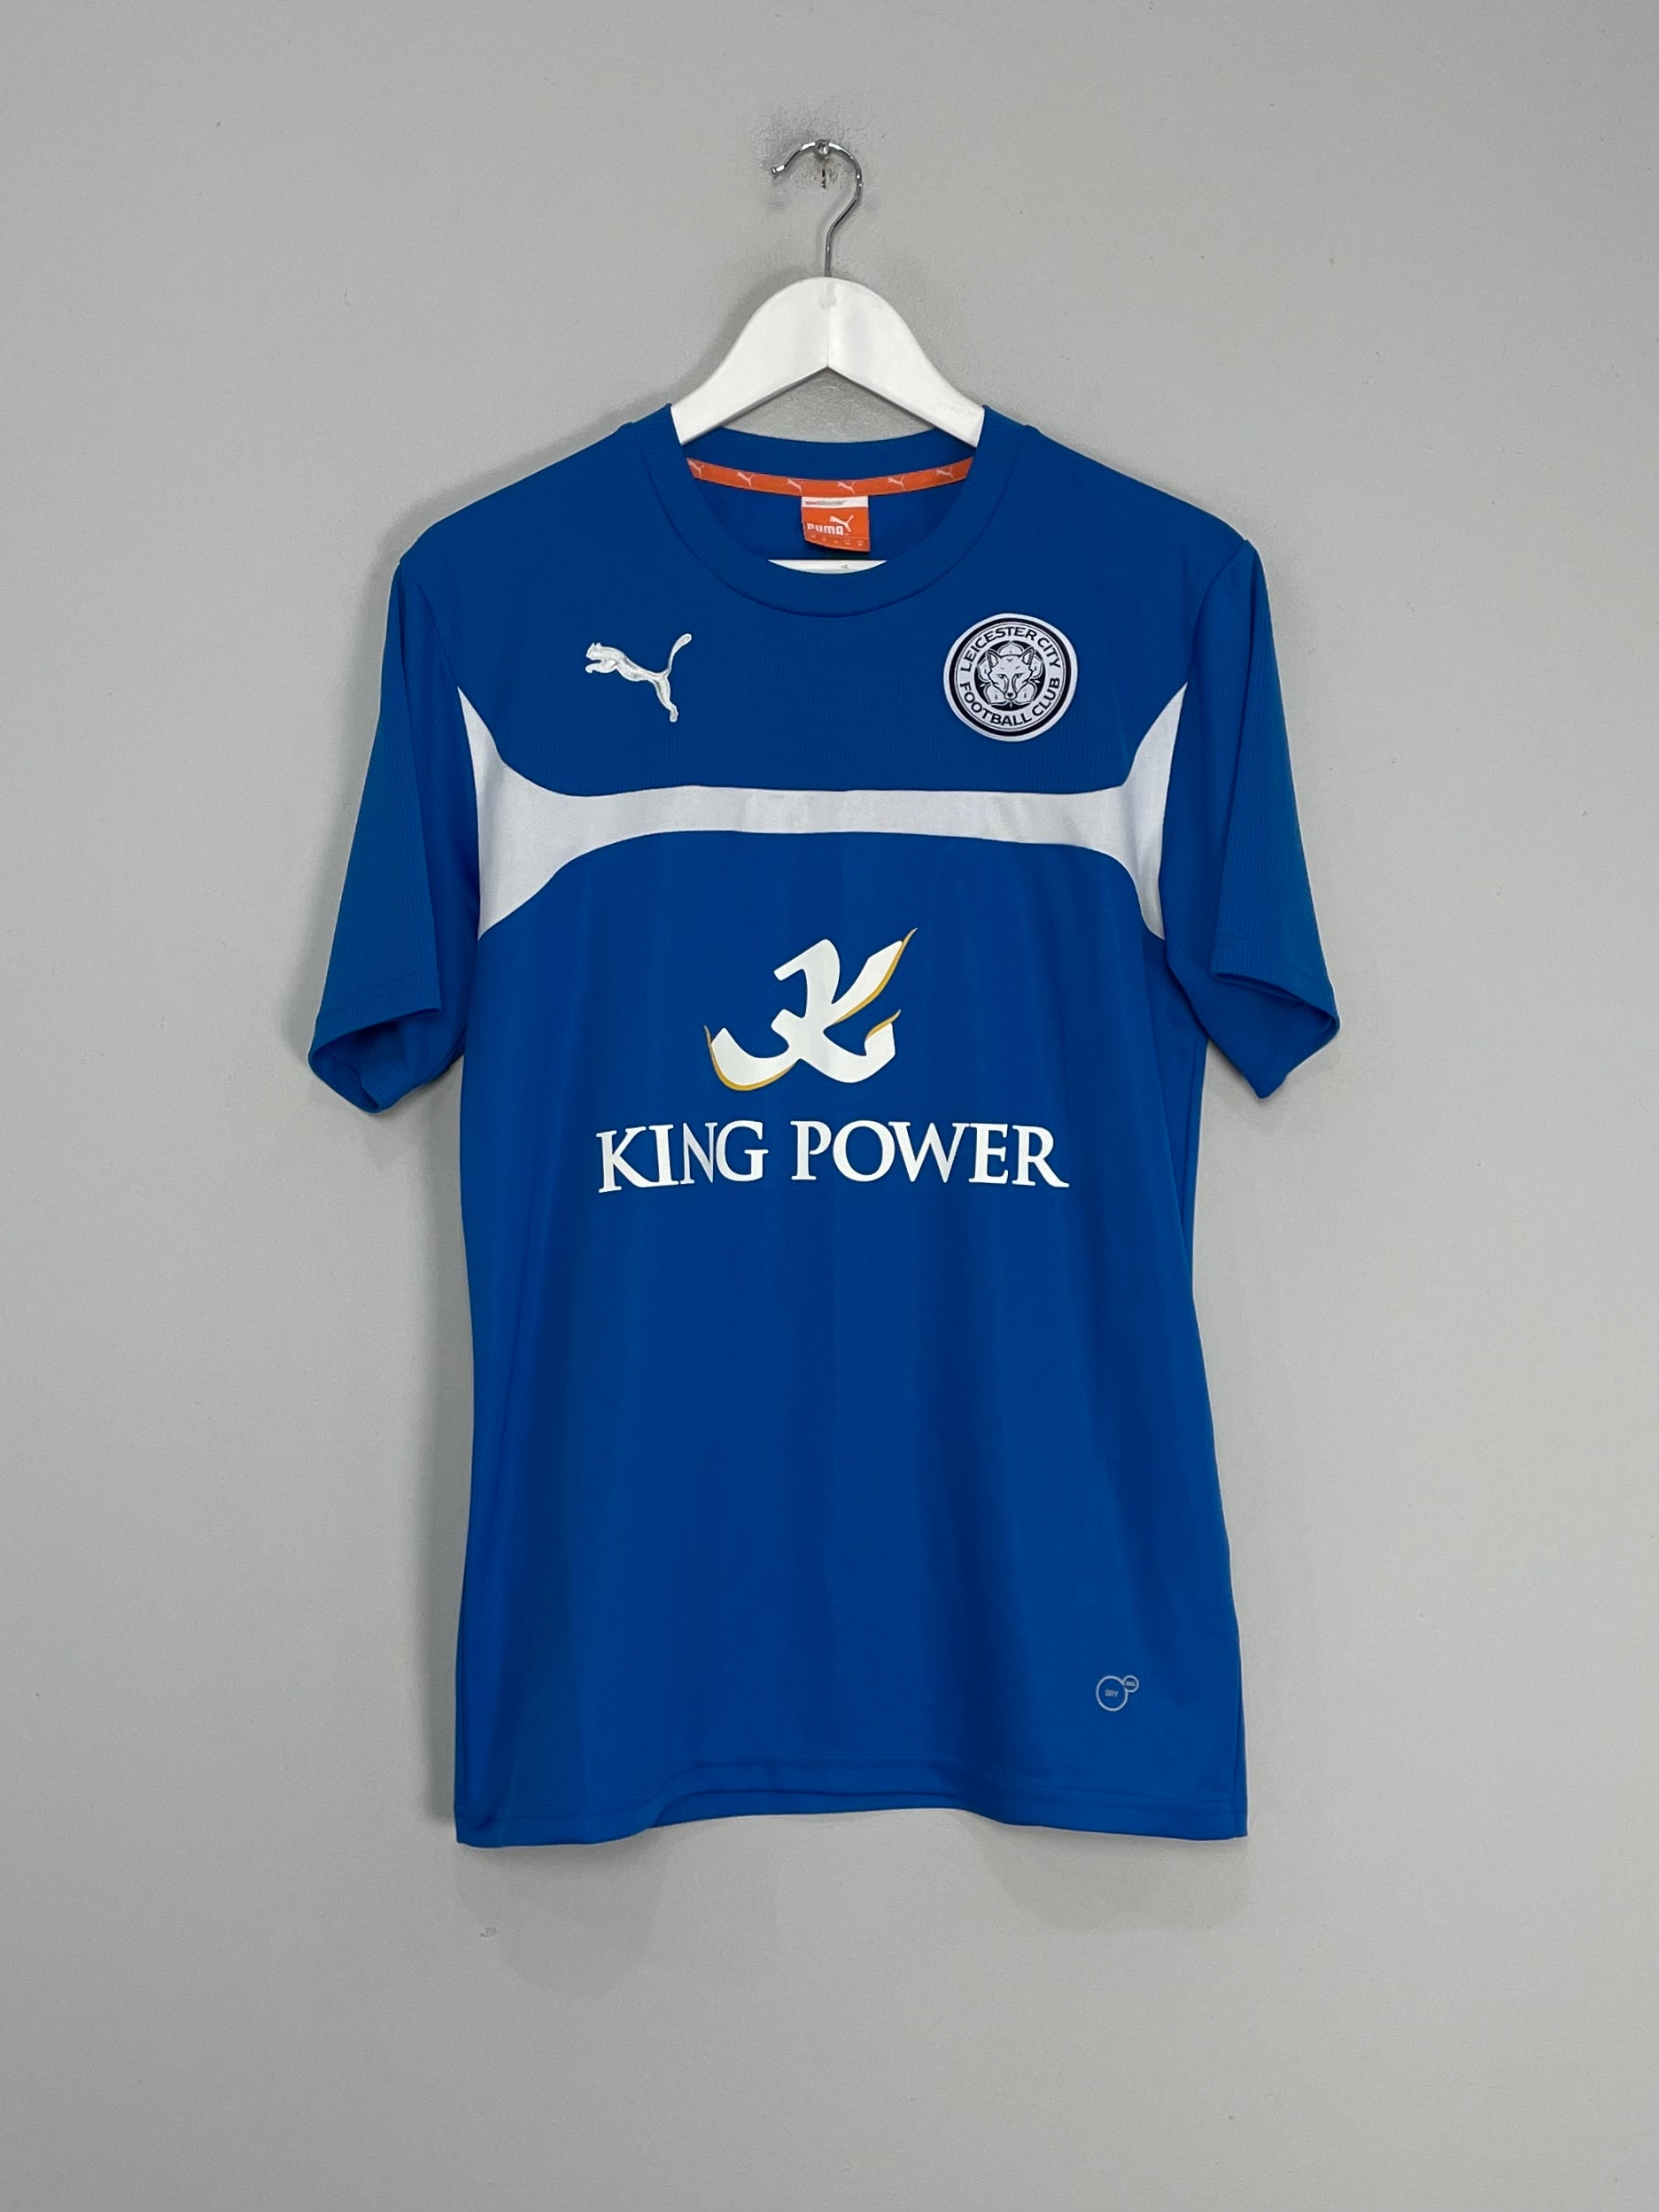 leicester city football club t shirts